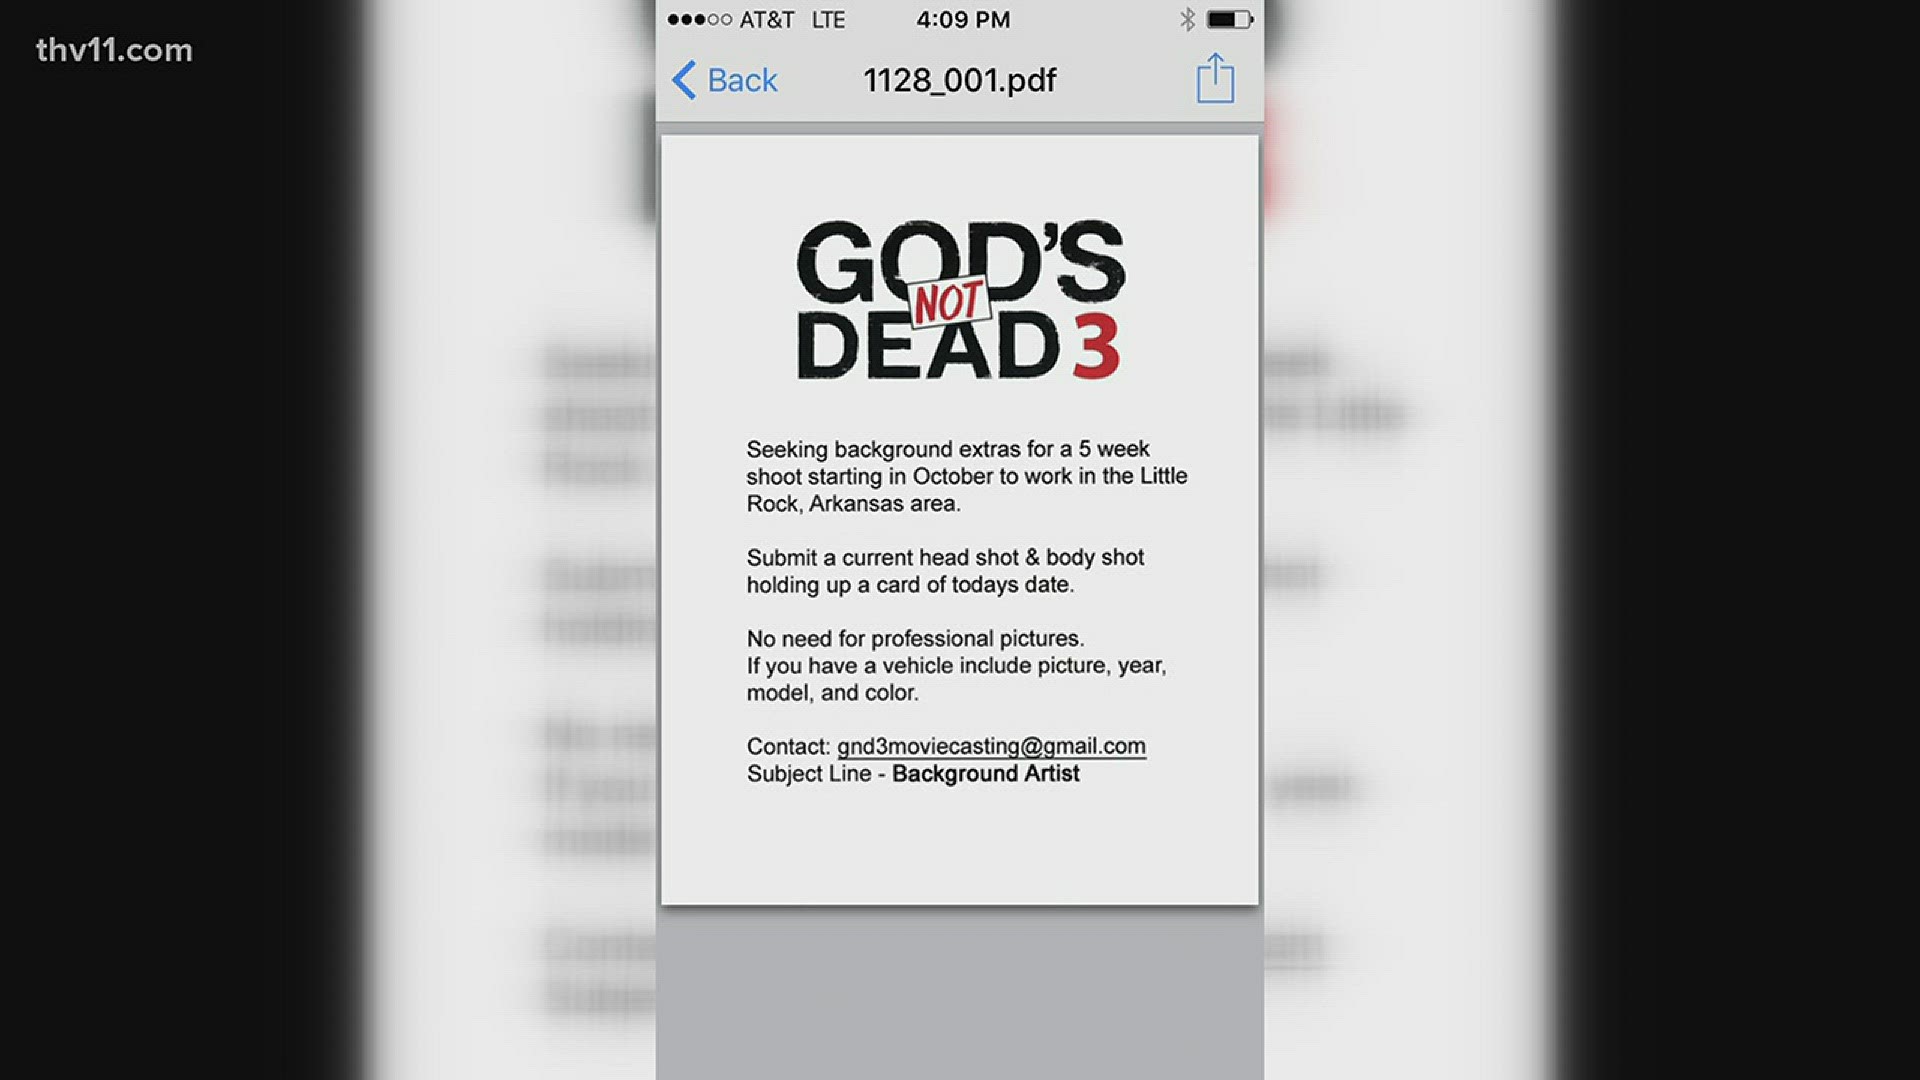 How to apply to be in the cast of "God's Not Dead 3."